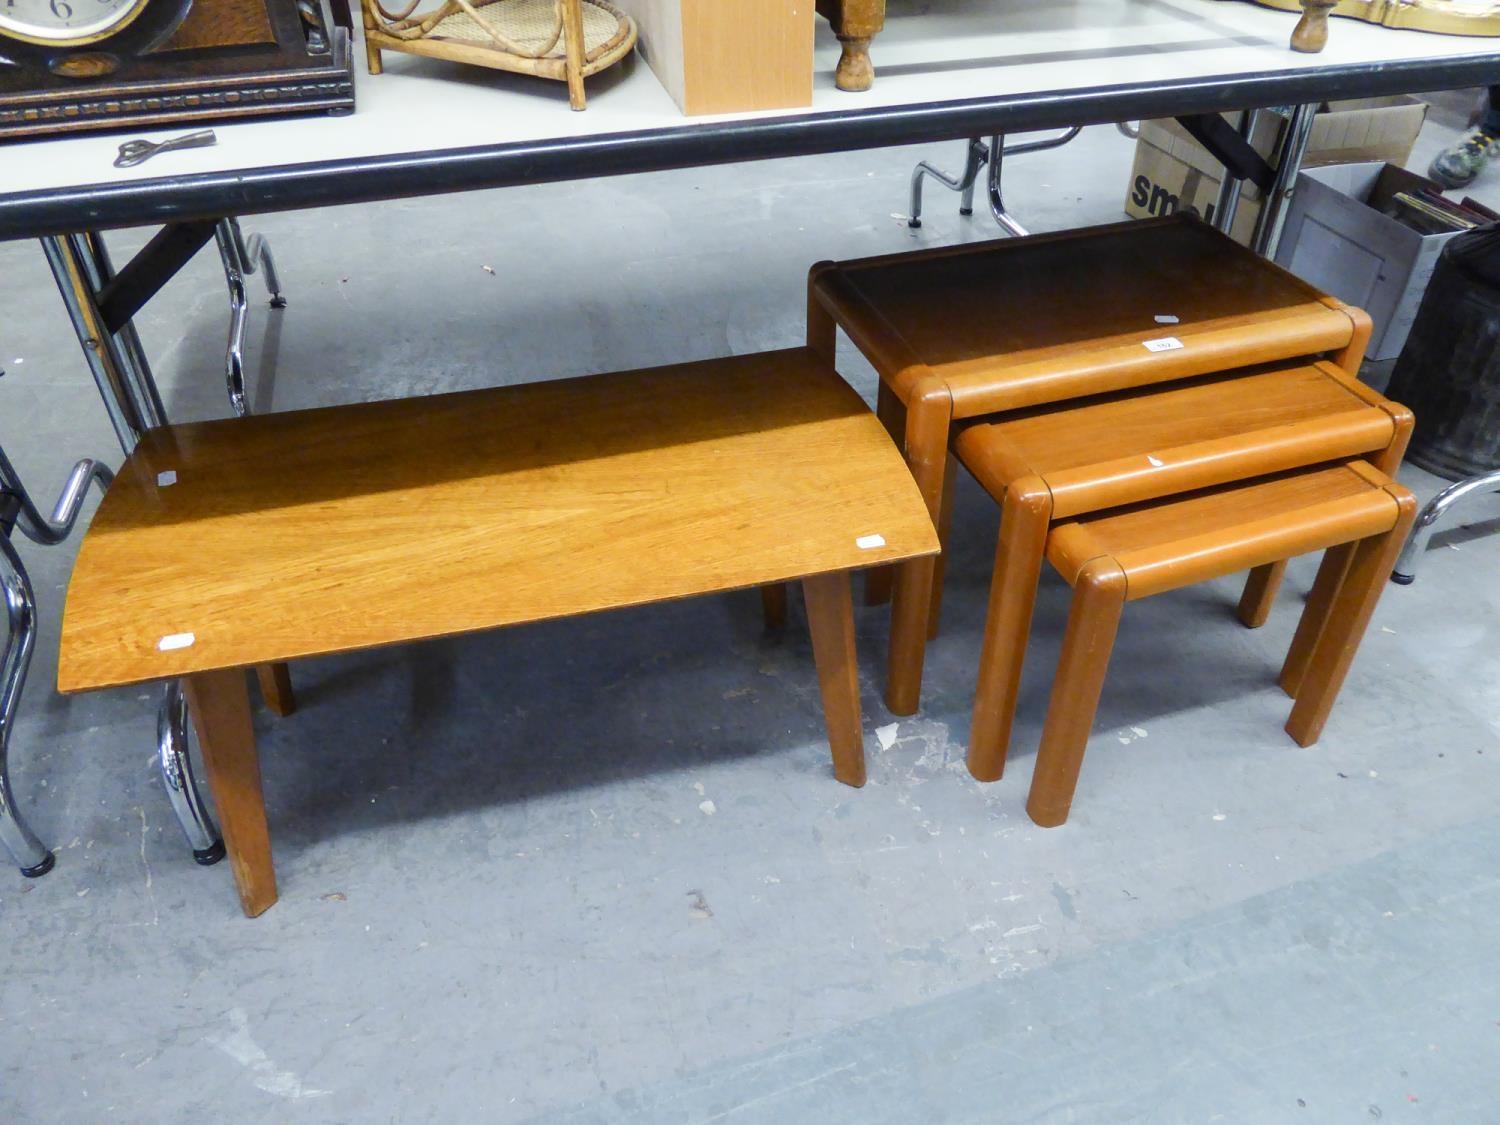 A NEST OF THREE TEAK OBLONG COFFEE TABLES, ON STRAIGHT LEGS AND A 1960'S OAK OBLONG COFFEE TABLE, ON